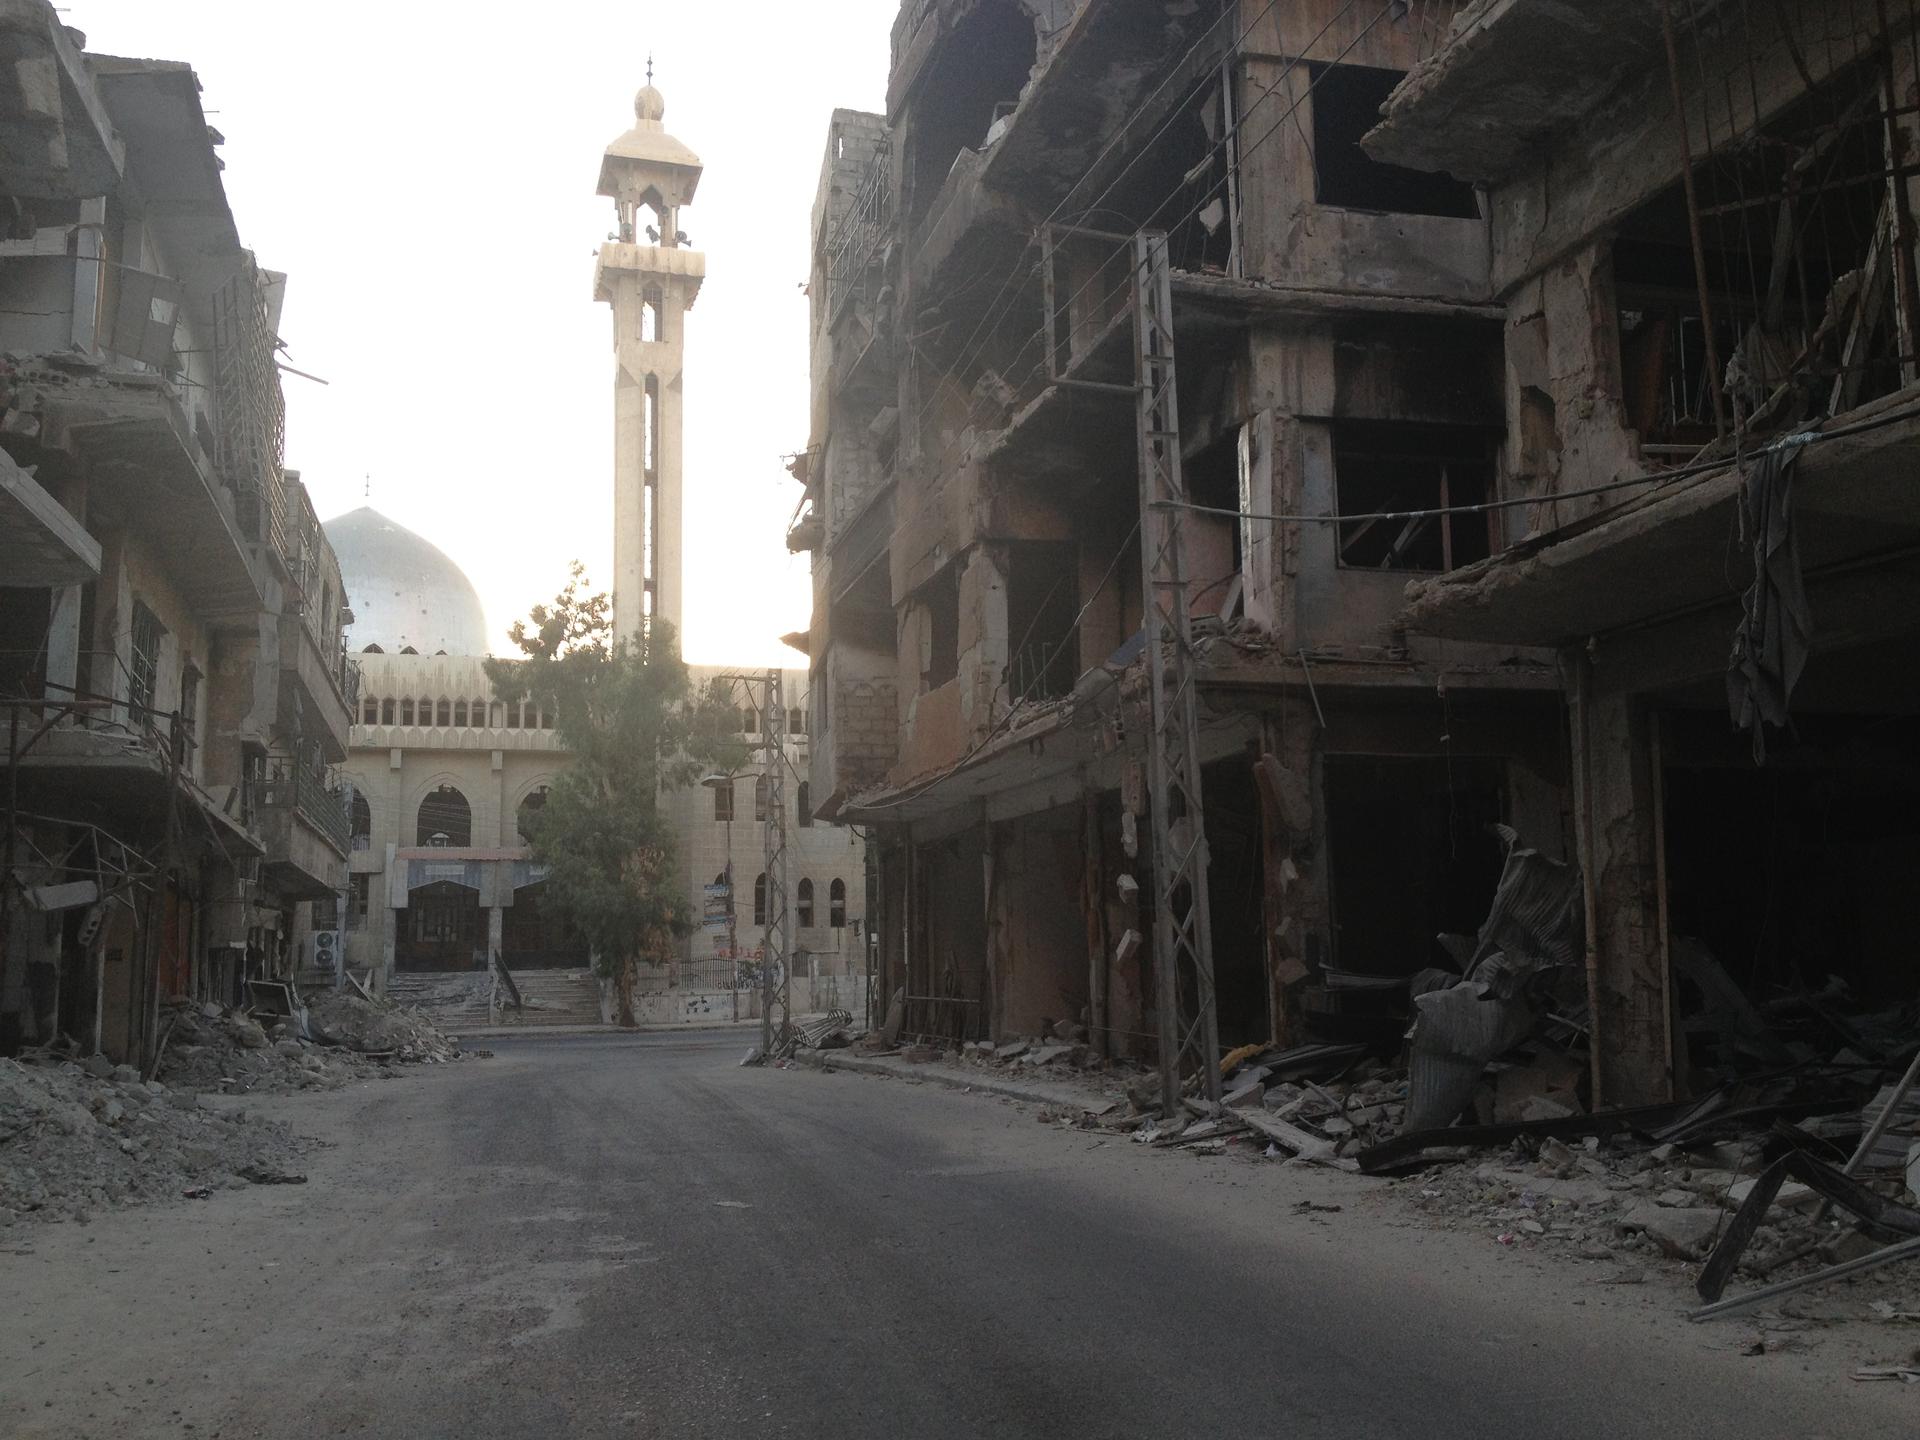 Even before the chemical attack, the Zamalka neighborhood of Damascus suffered government bombardment.